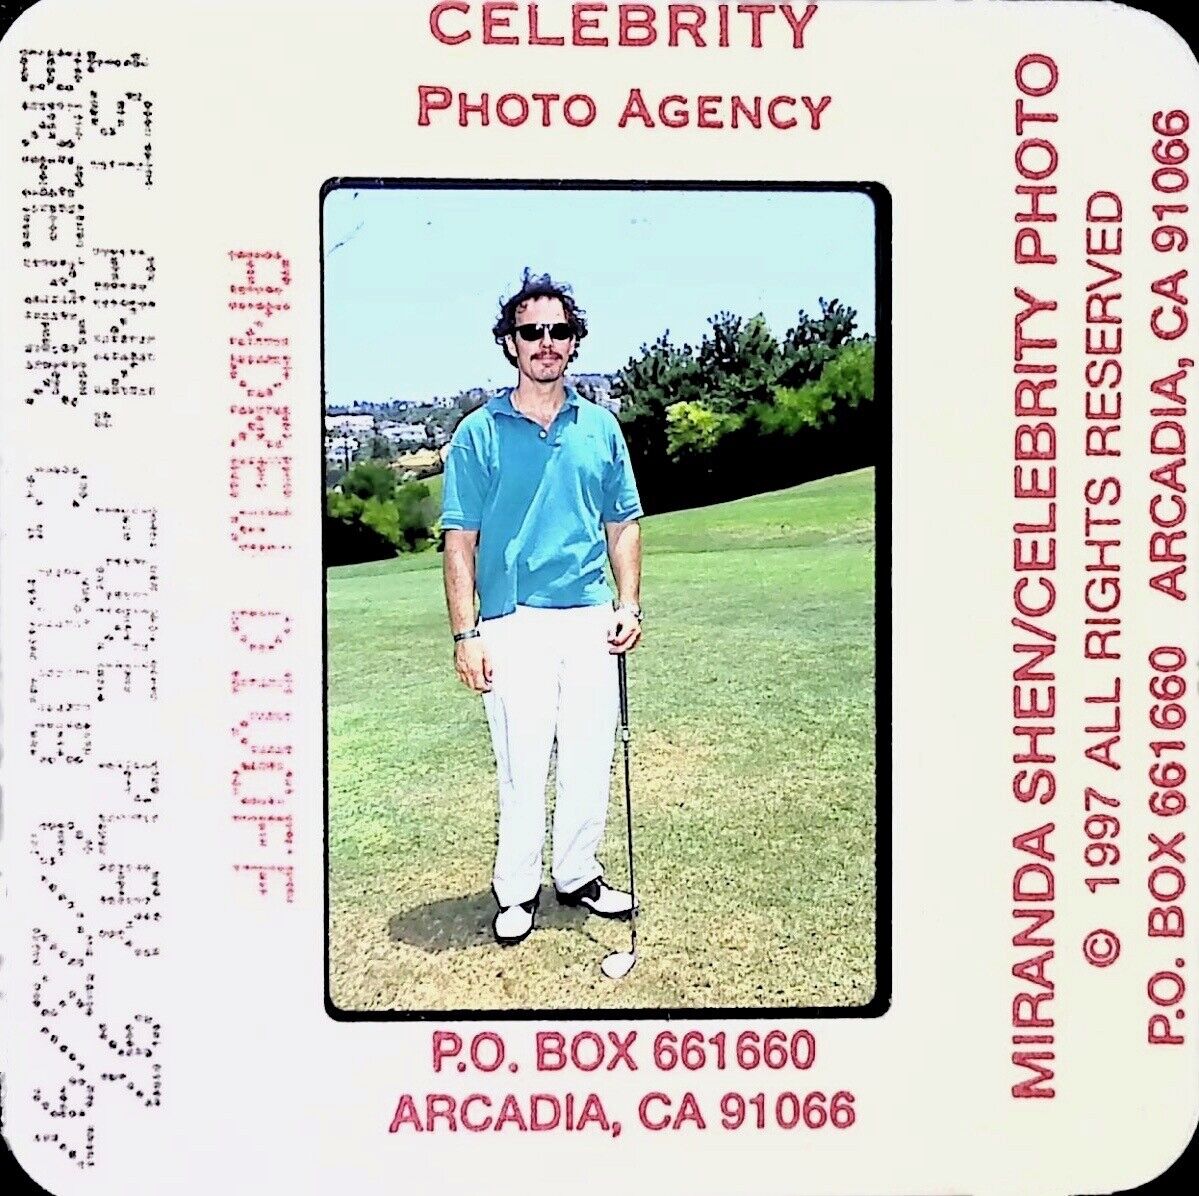 1997 ANDREW DIVOT AT 1ST ANN. FOREPLAY BRAEMAR COUNTRY CLUB - 35MM SLIDE L.4.4.3